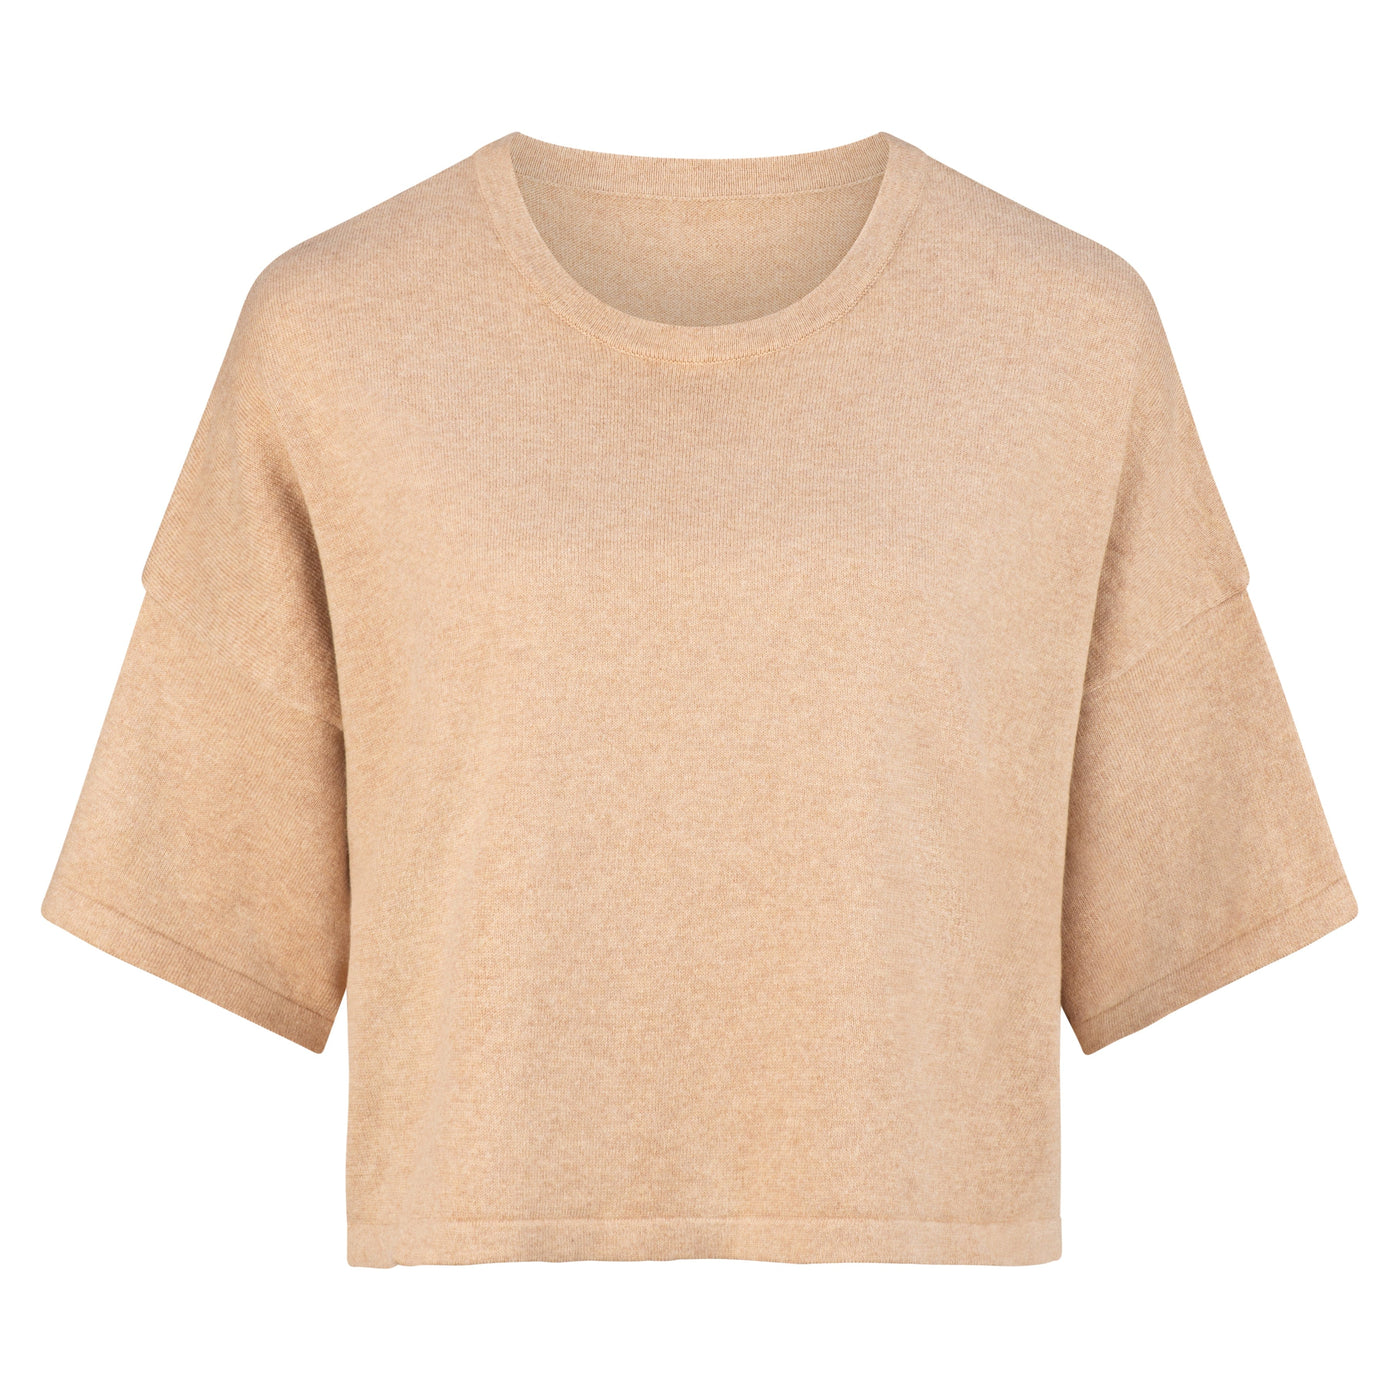 Lilly Pilly Collection Anna knit top made of cotton and cashmere in Oatmeal. 3D model image showing front view.